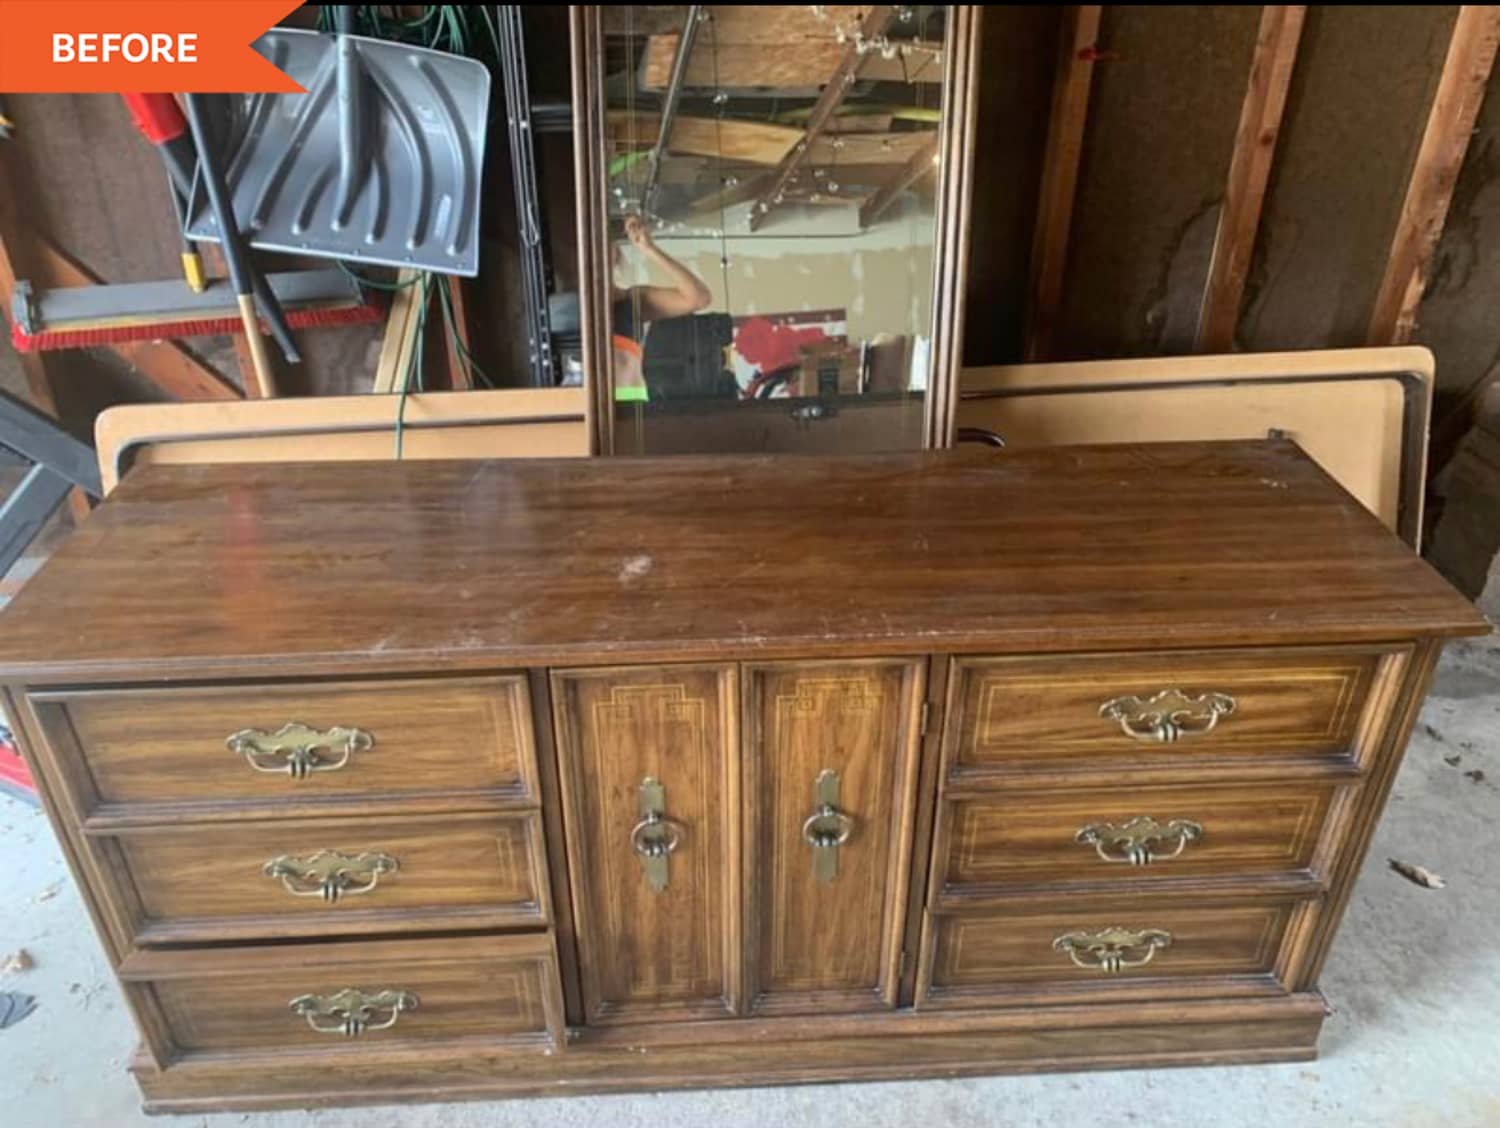 Before and After: A Secondhand Bedroom Dresser Gets a New Life as a Functional Kitchen Feature